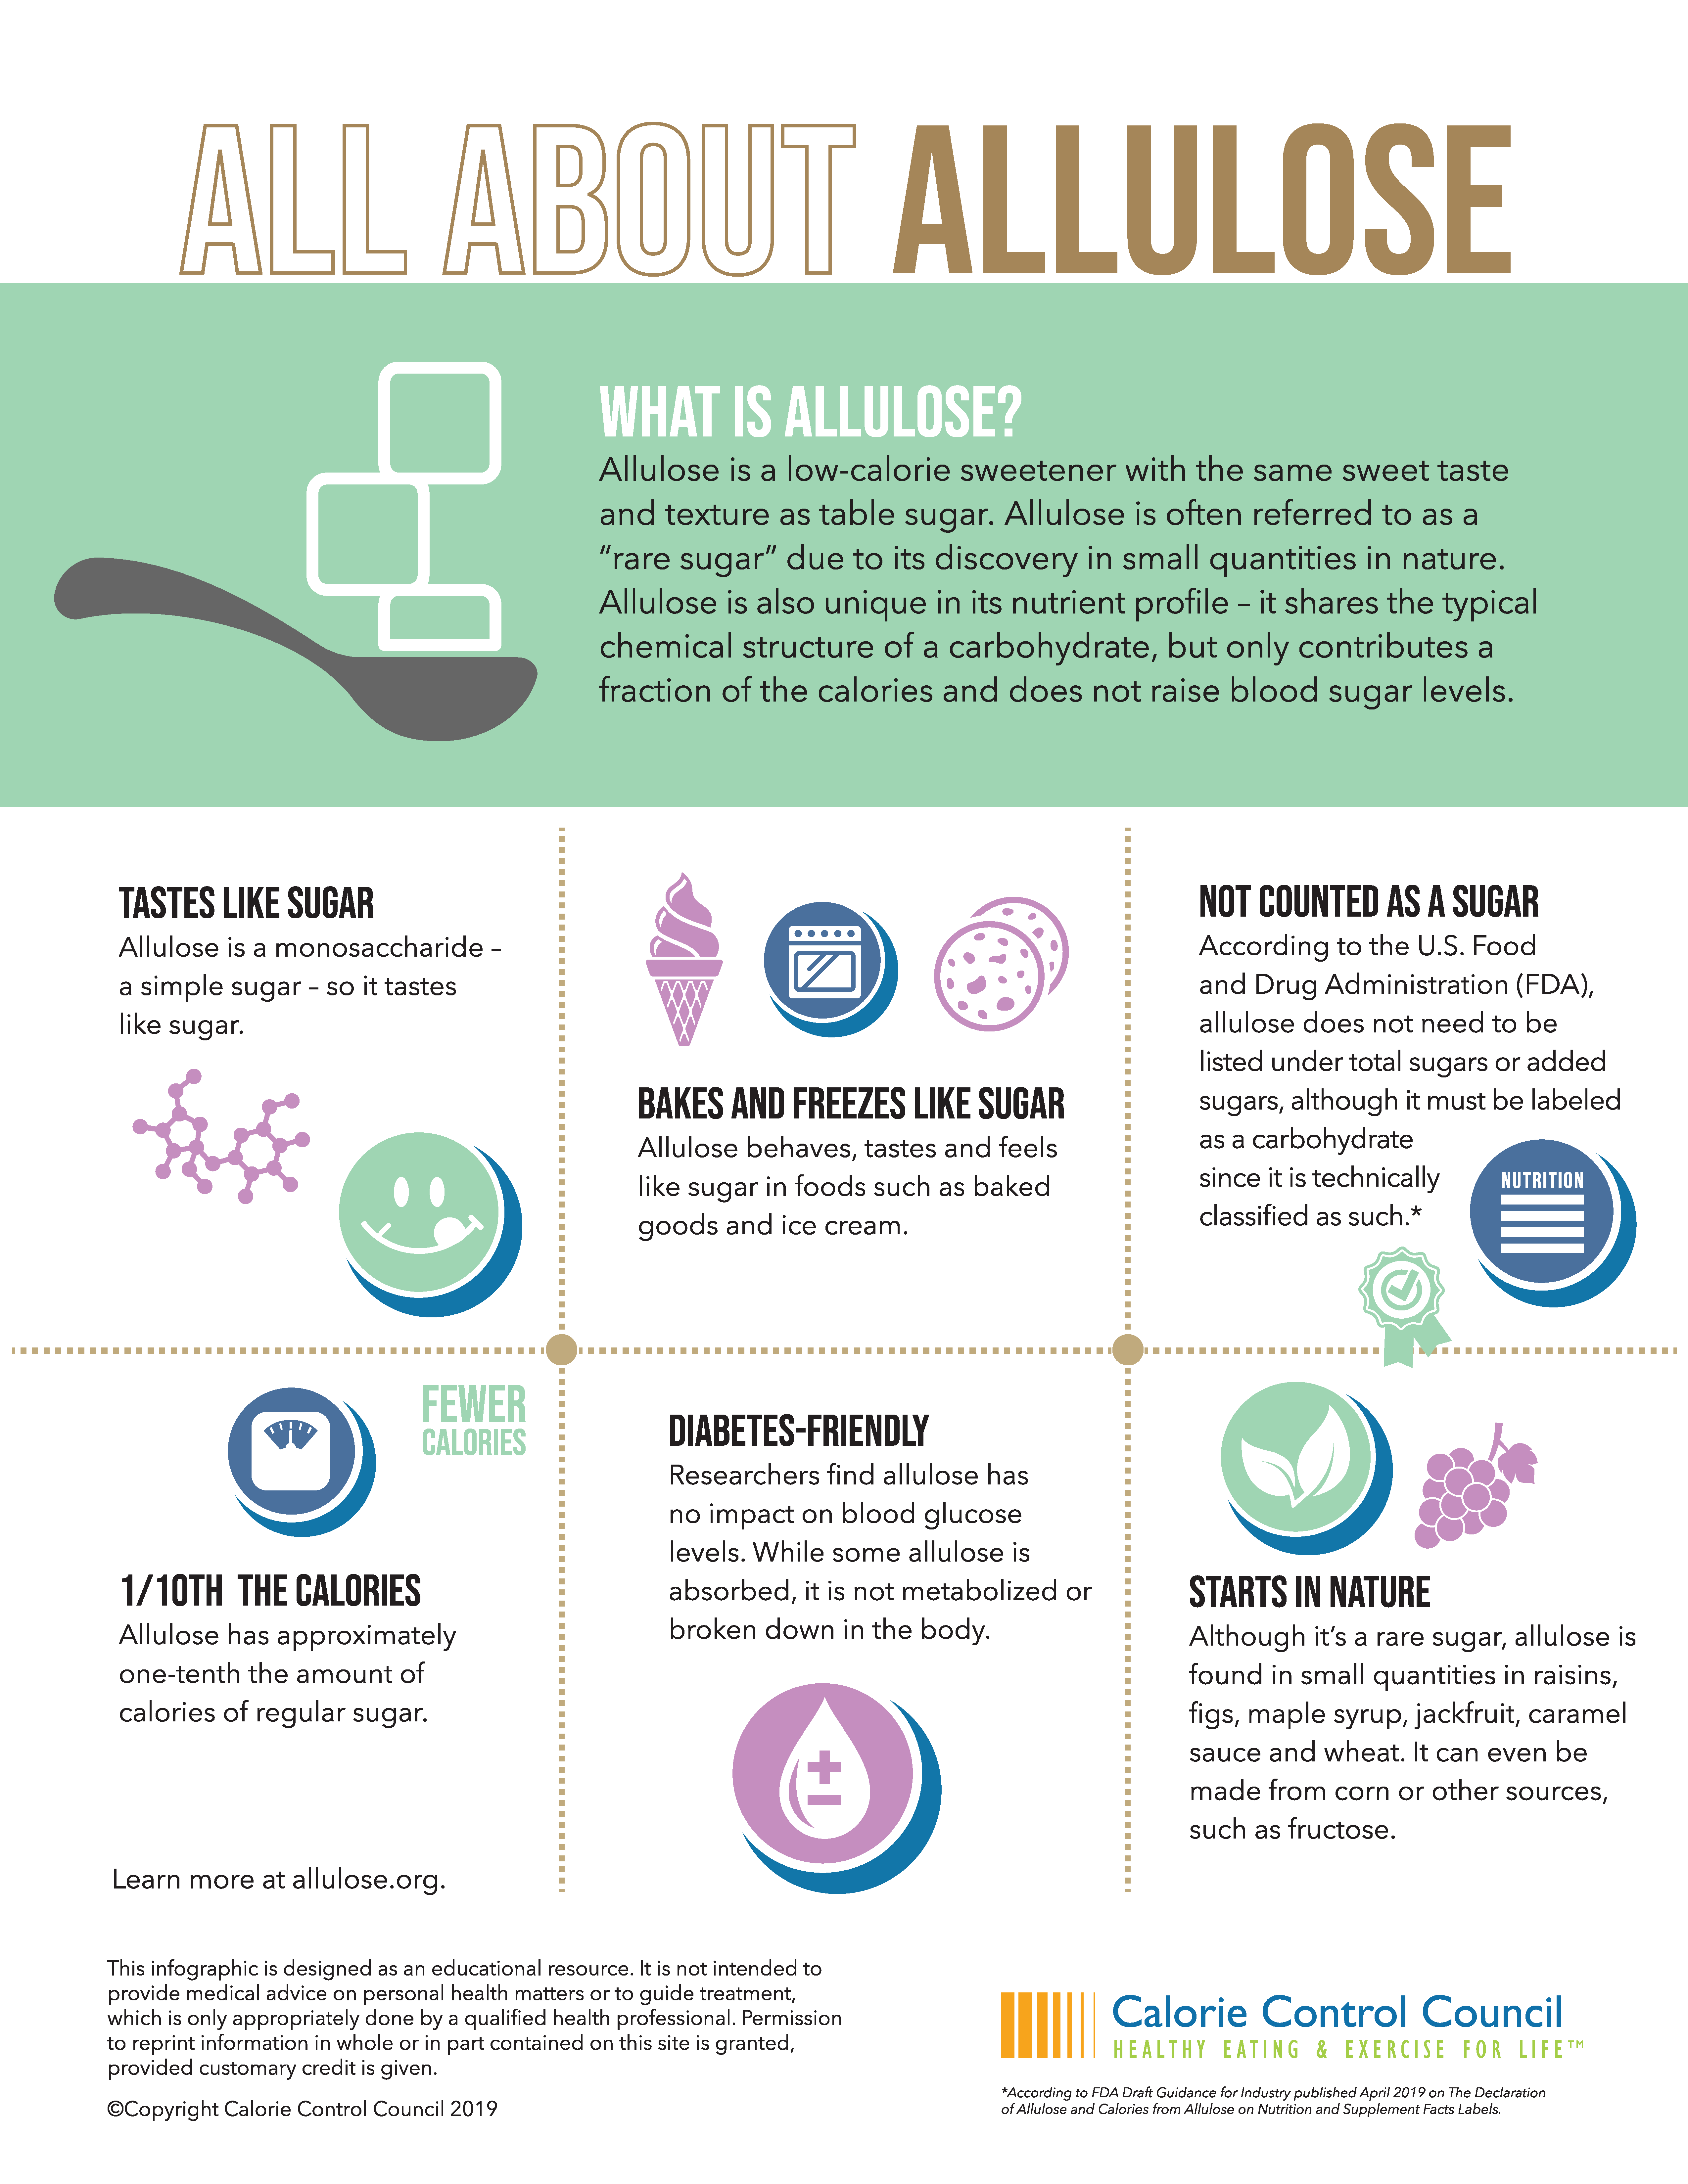 Allulose: A Scientific Guide to Safety, Benefits, and Recipes